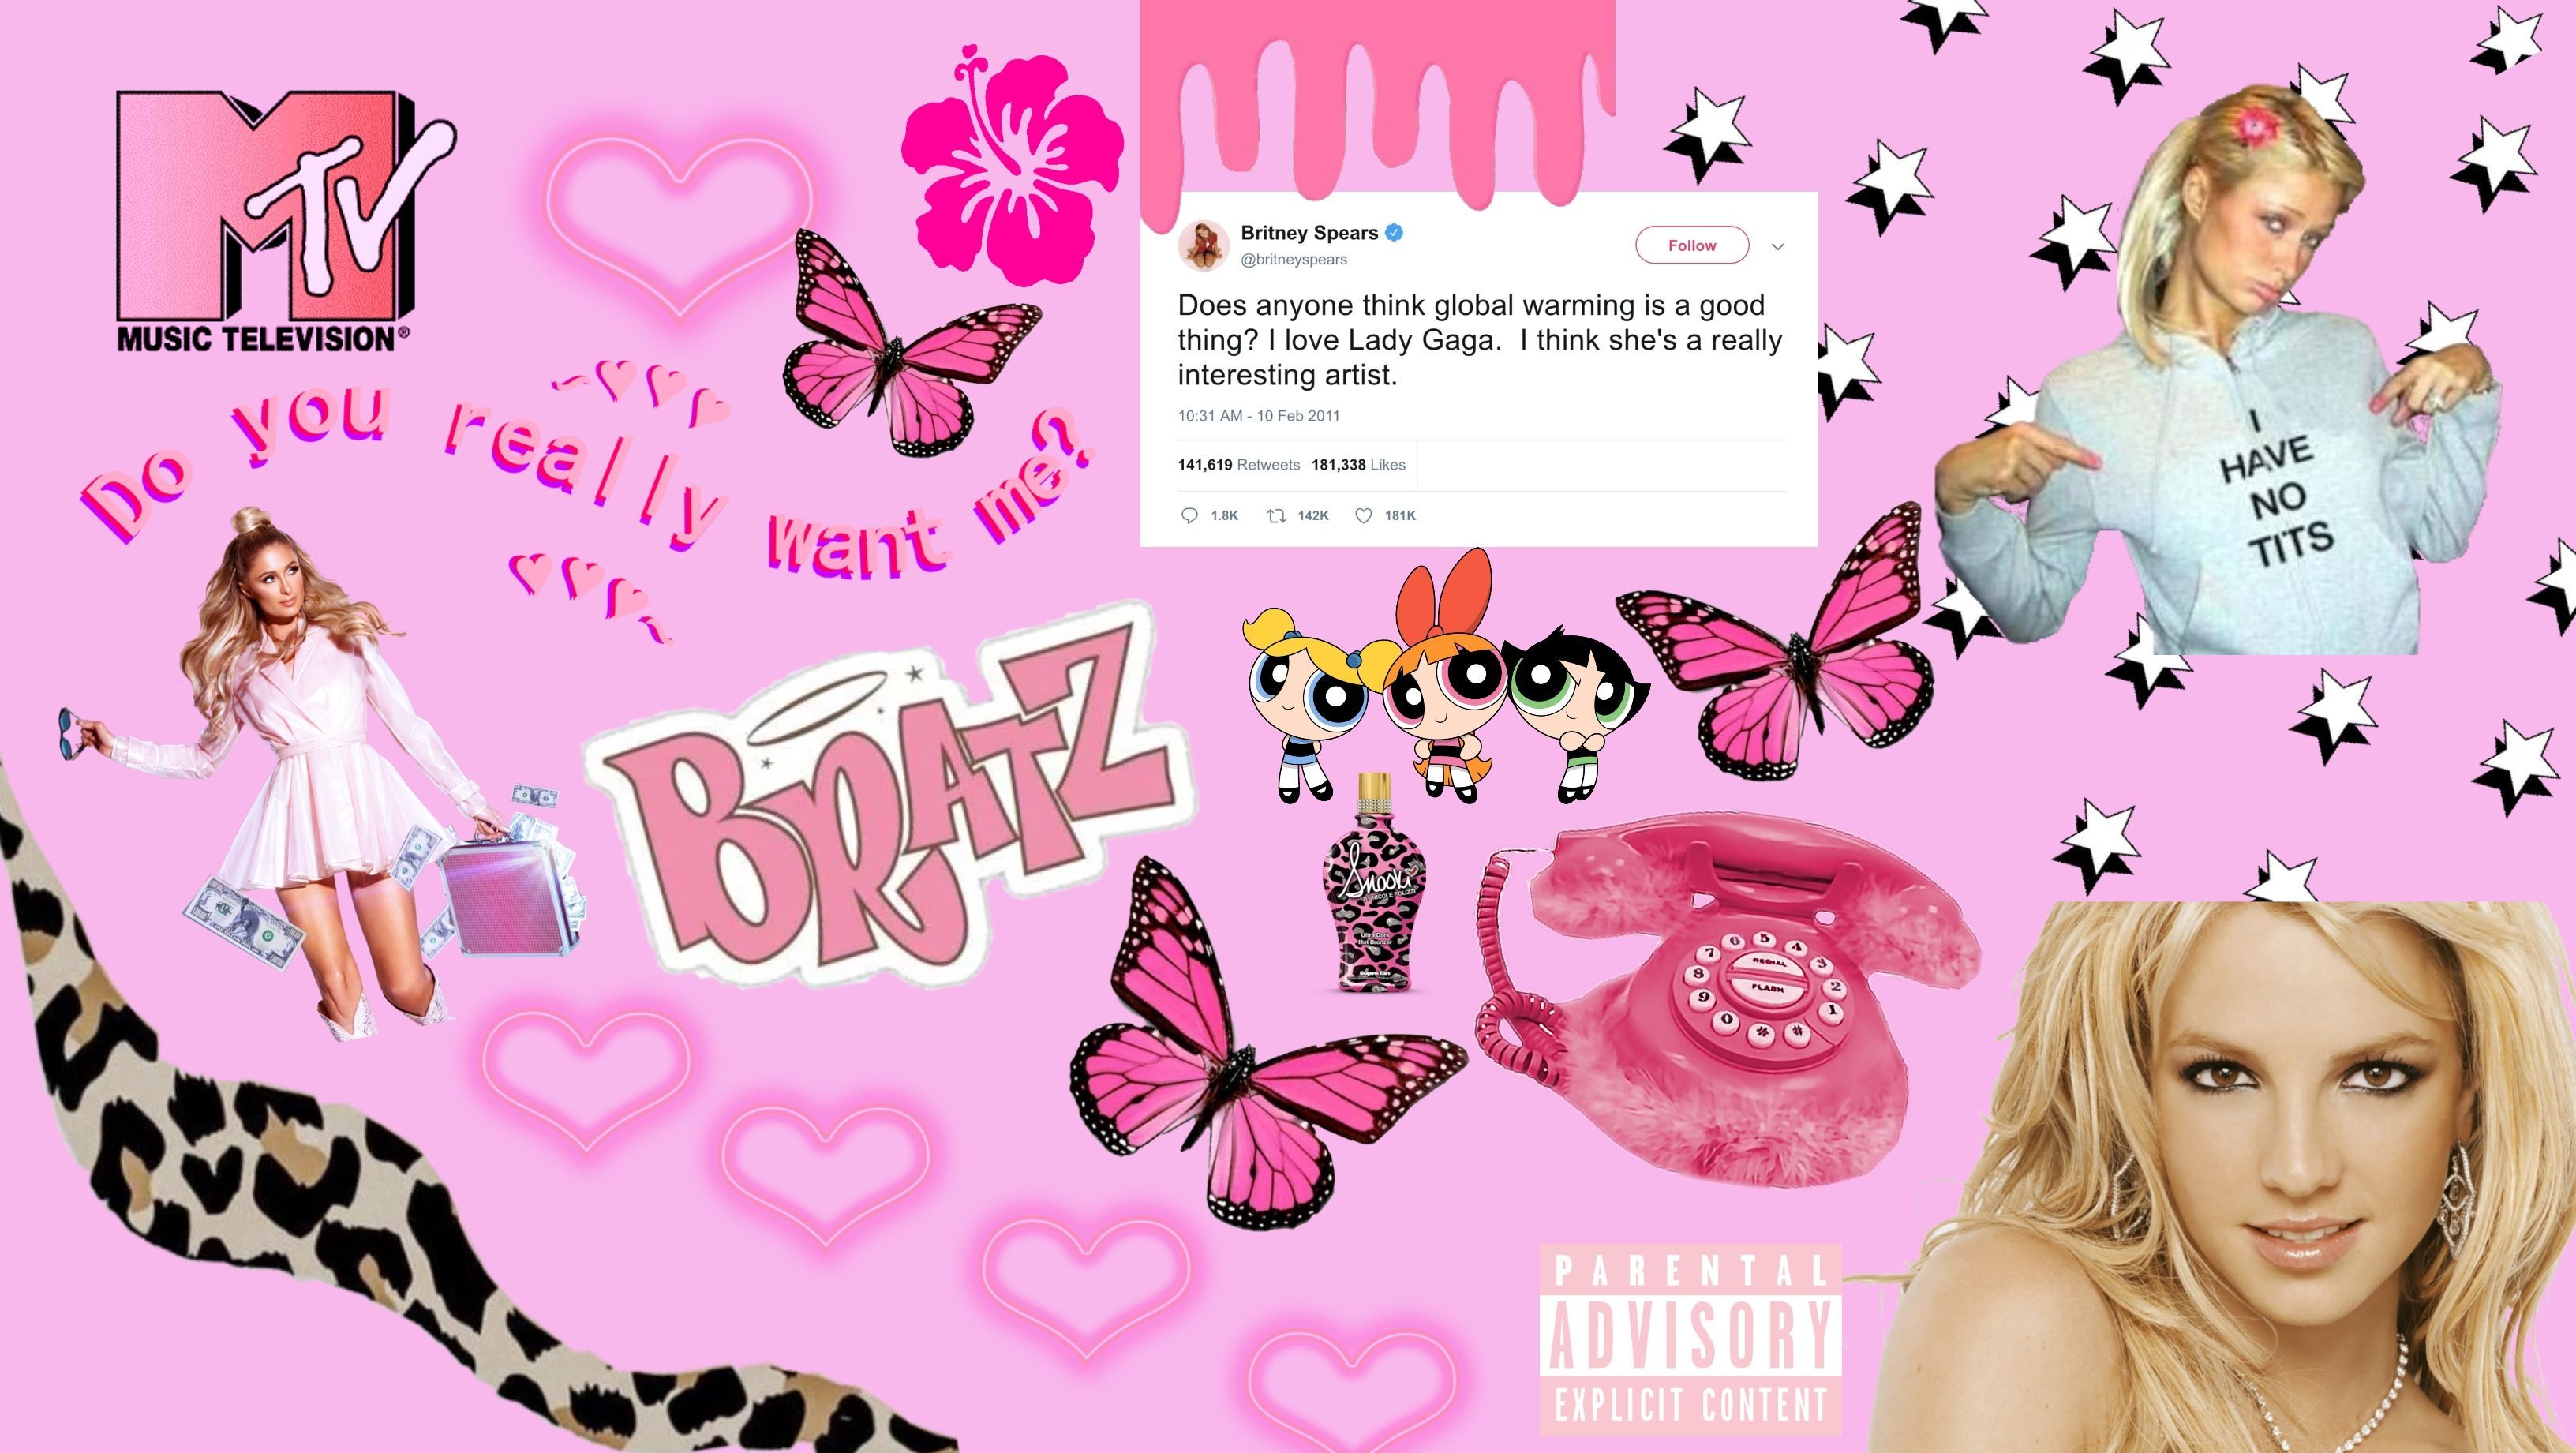 A collage of images including Britney Spears, a pink background, a tweet from mtv, a pink telephone, and the word 